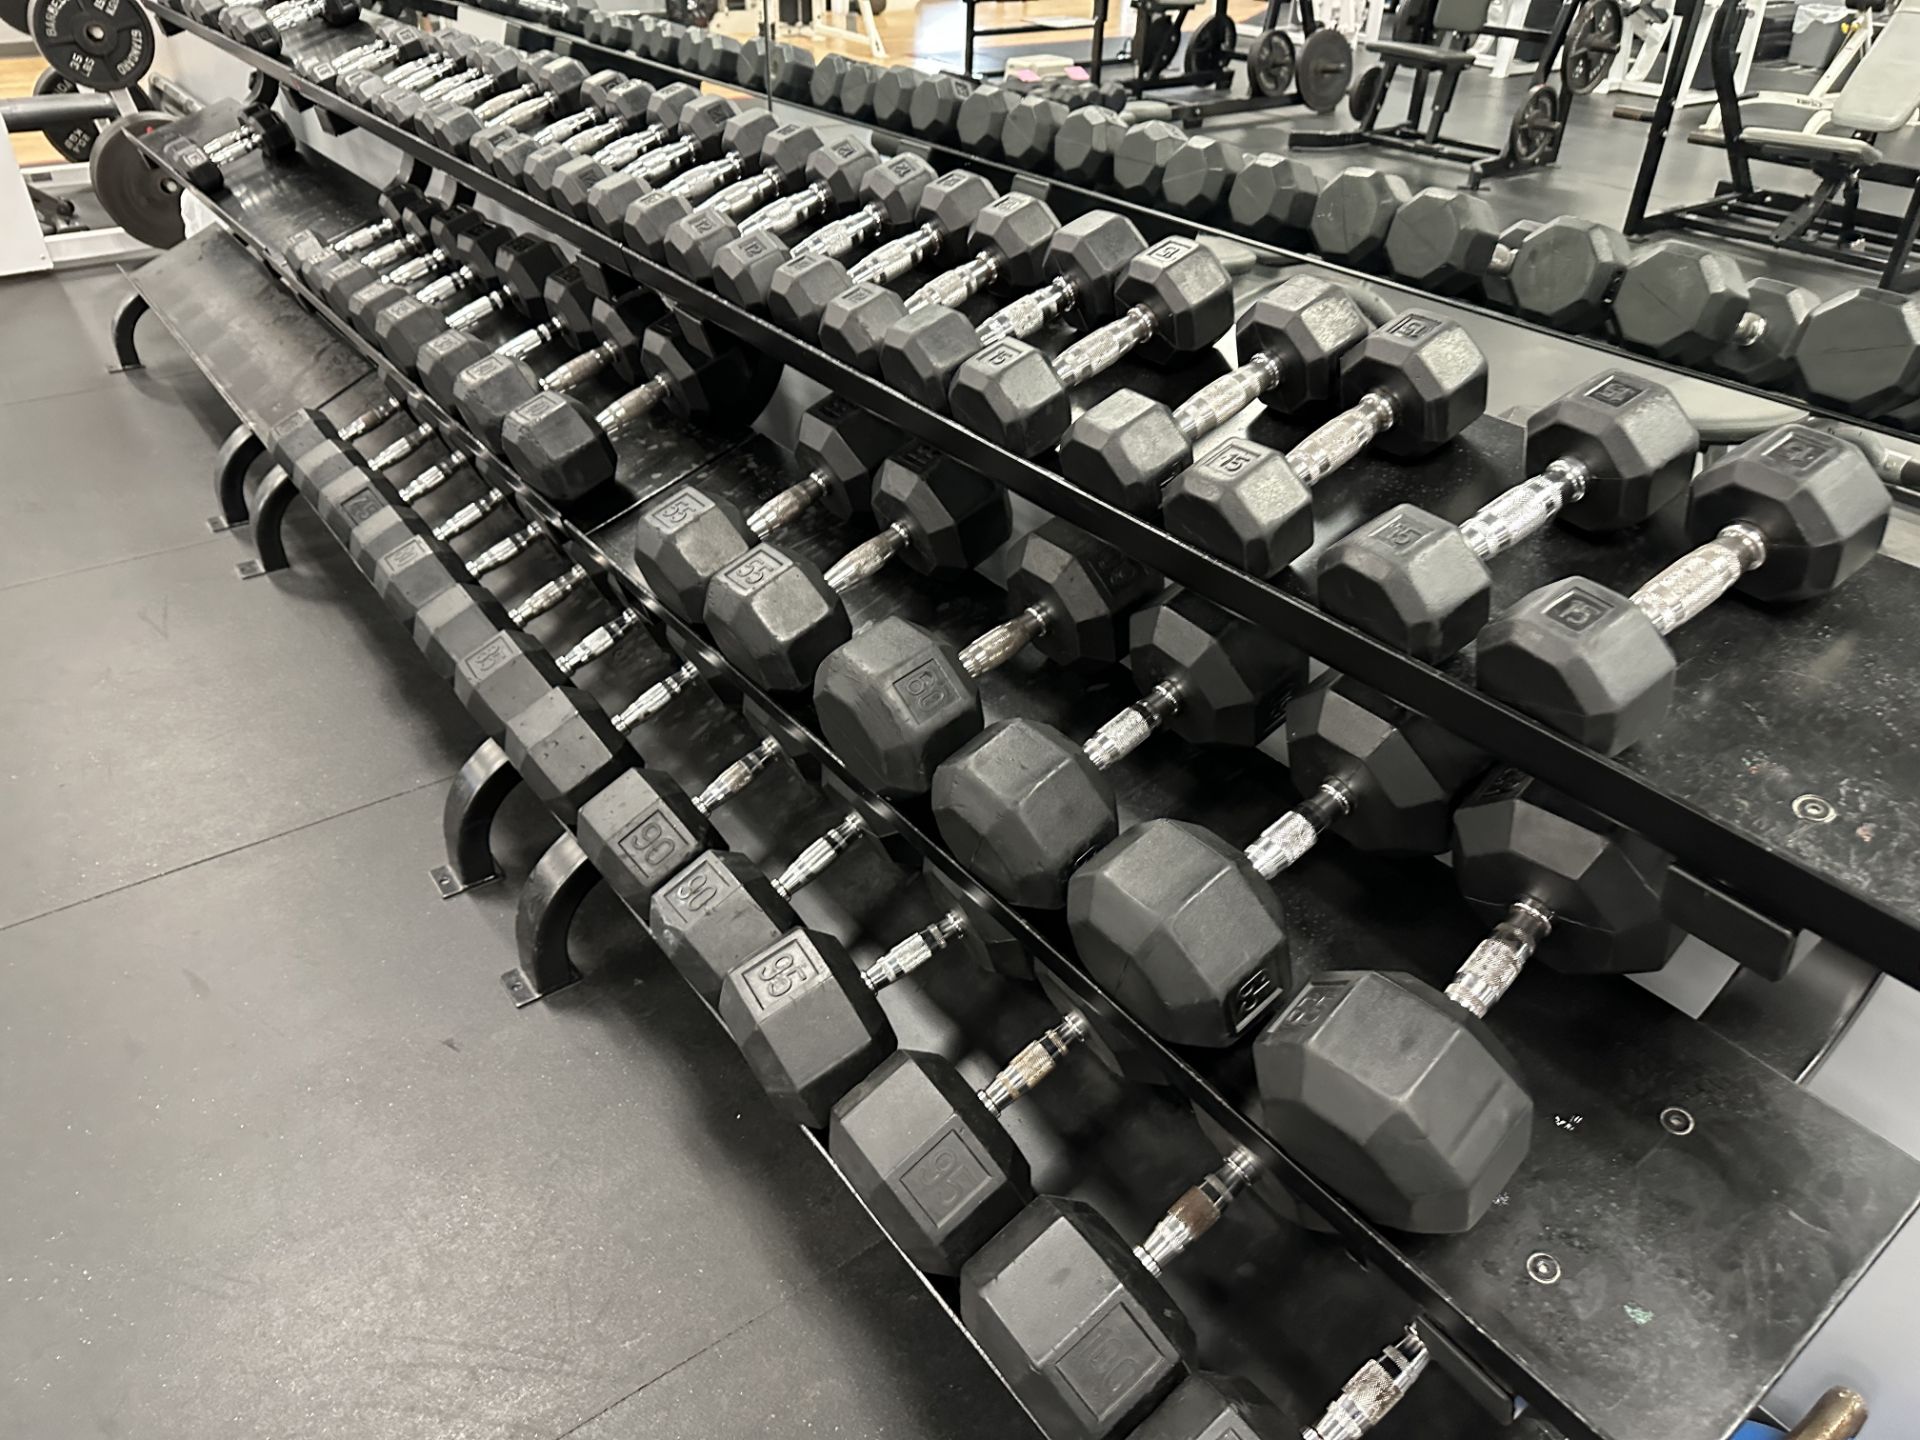 Full Set of Dumbbells Between 5 Lbs. - 100Lbs in 5 Lb. Increments (Excluding 50 Lb. And Adding Pairs - Image 2 of 4